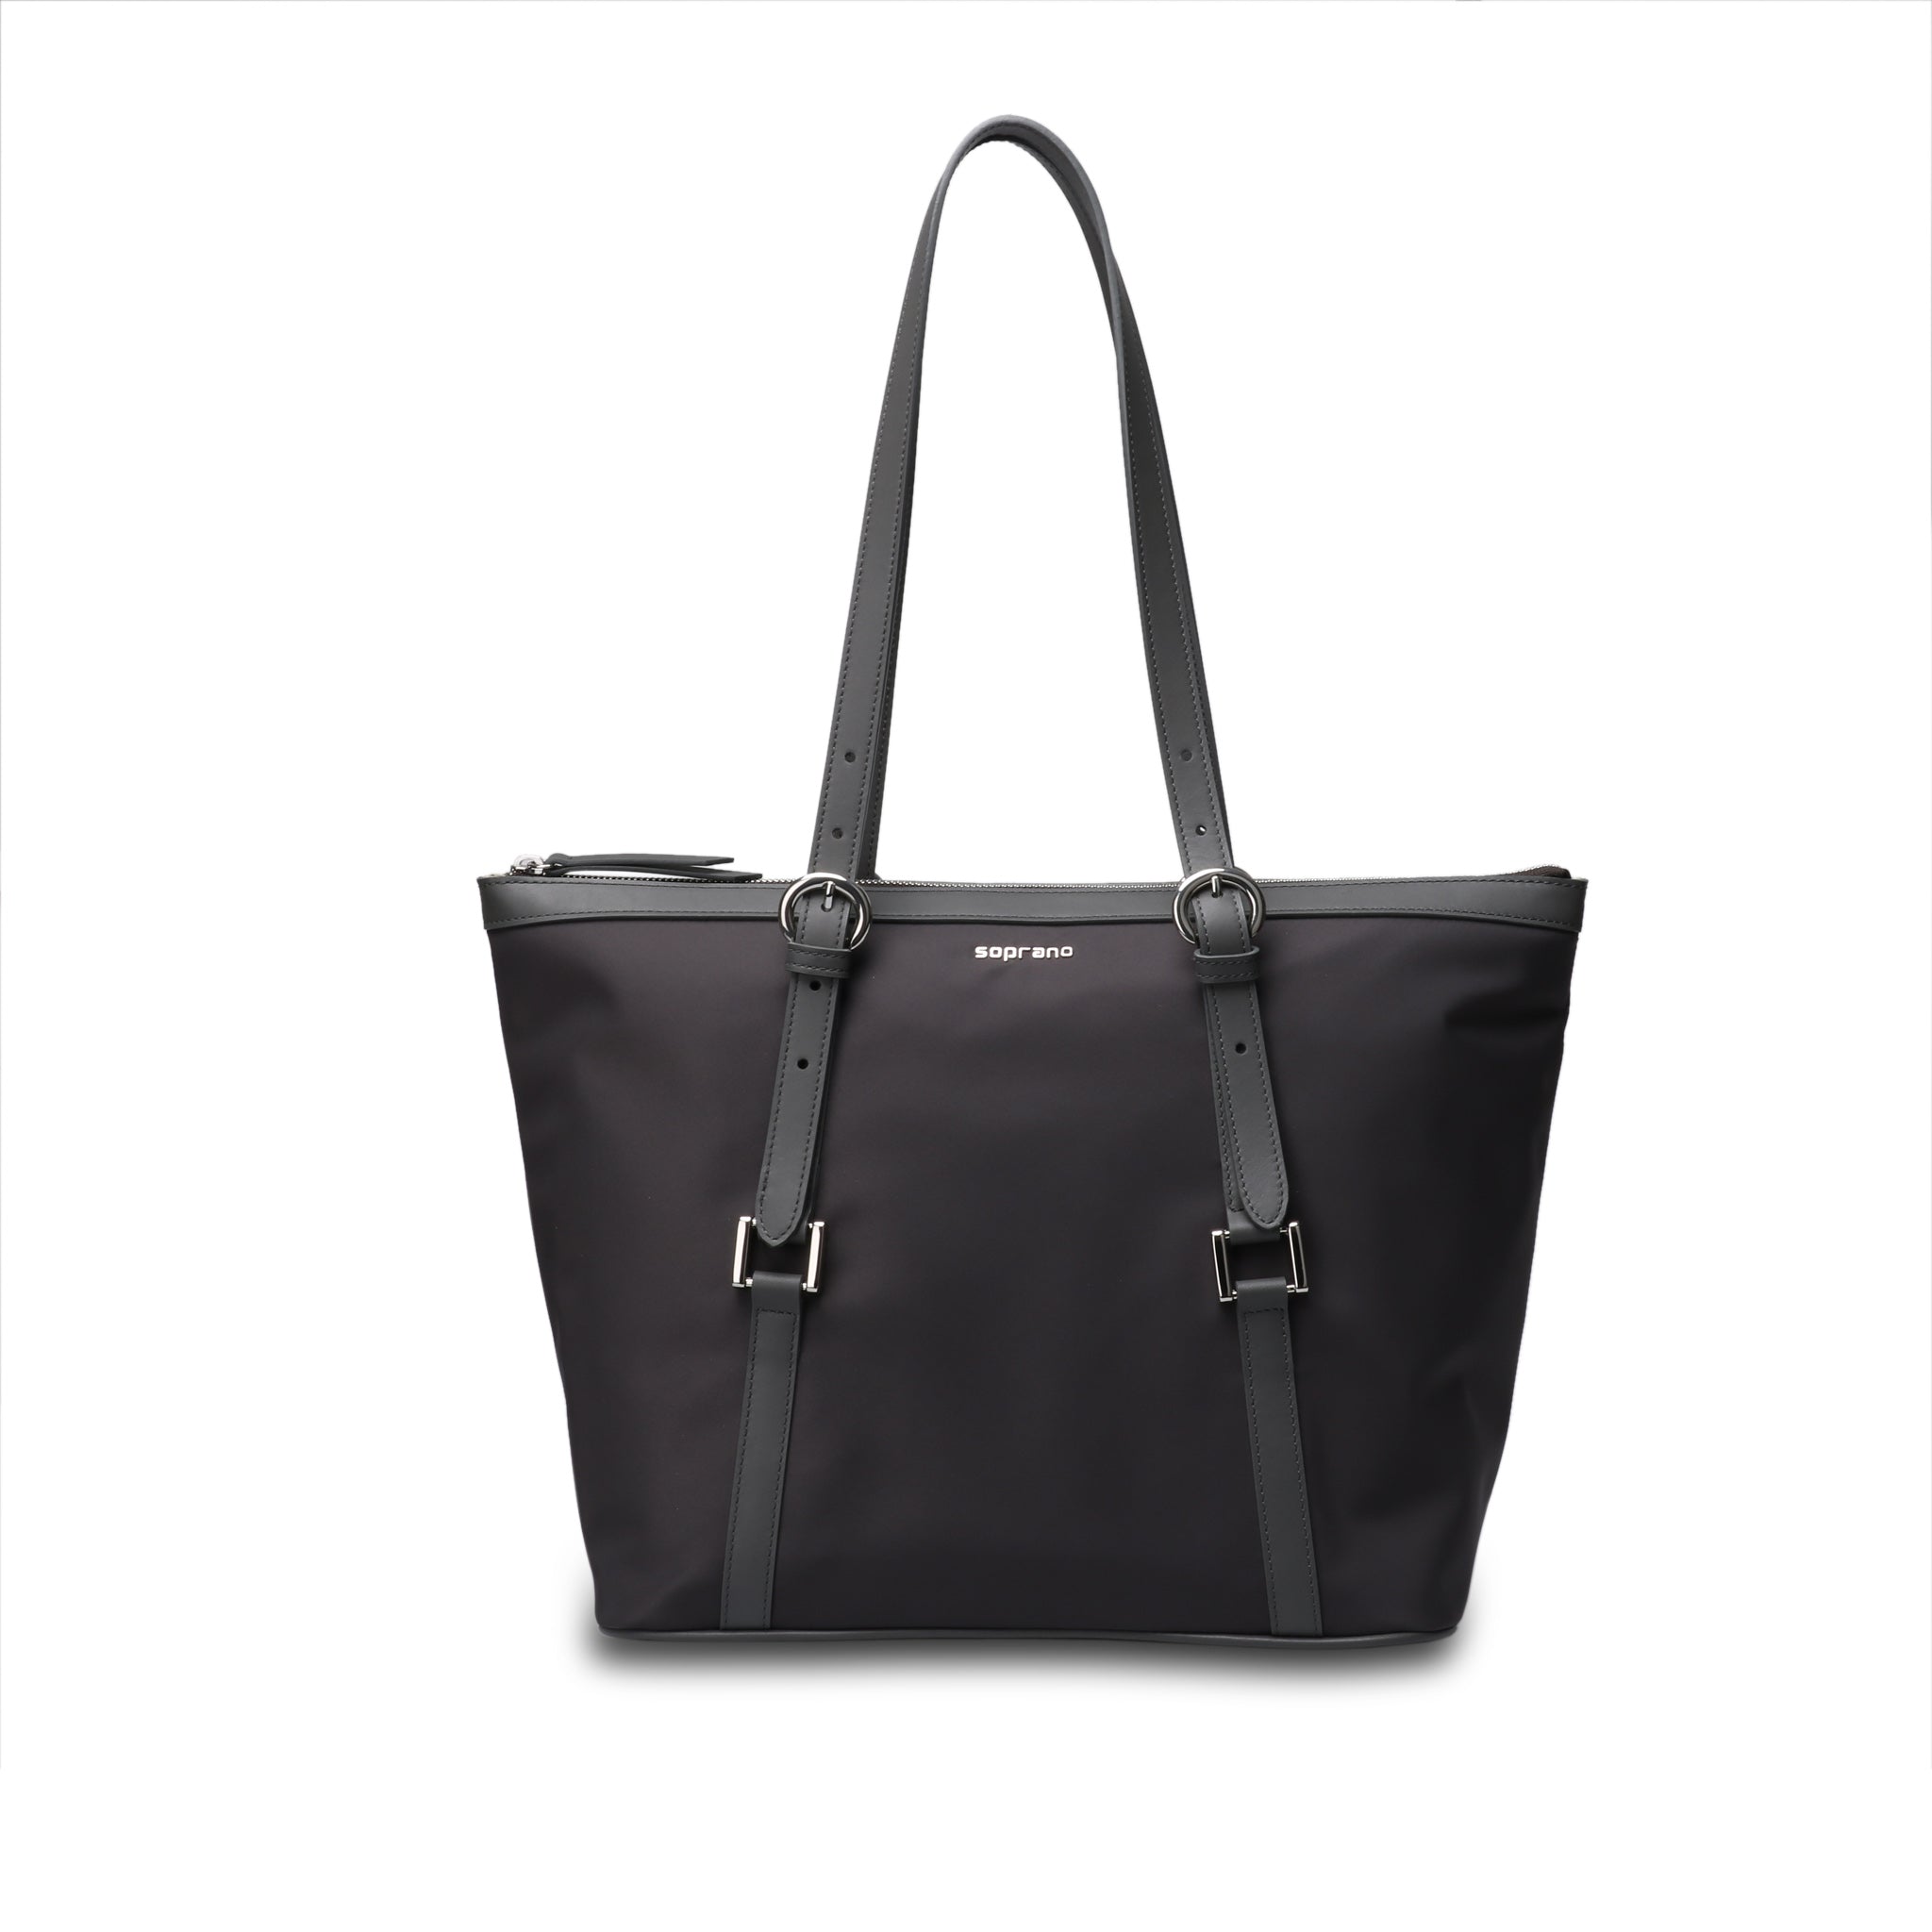 Nylon with Leather Tote Bag